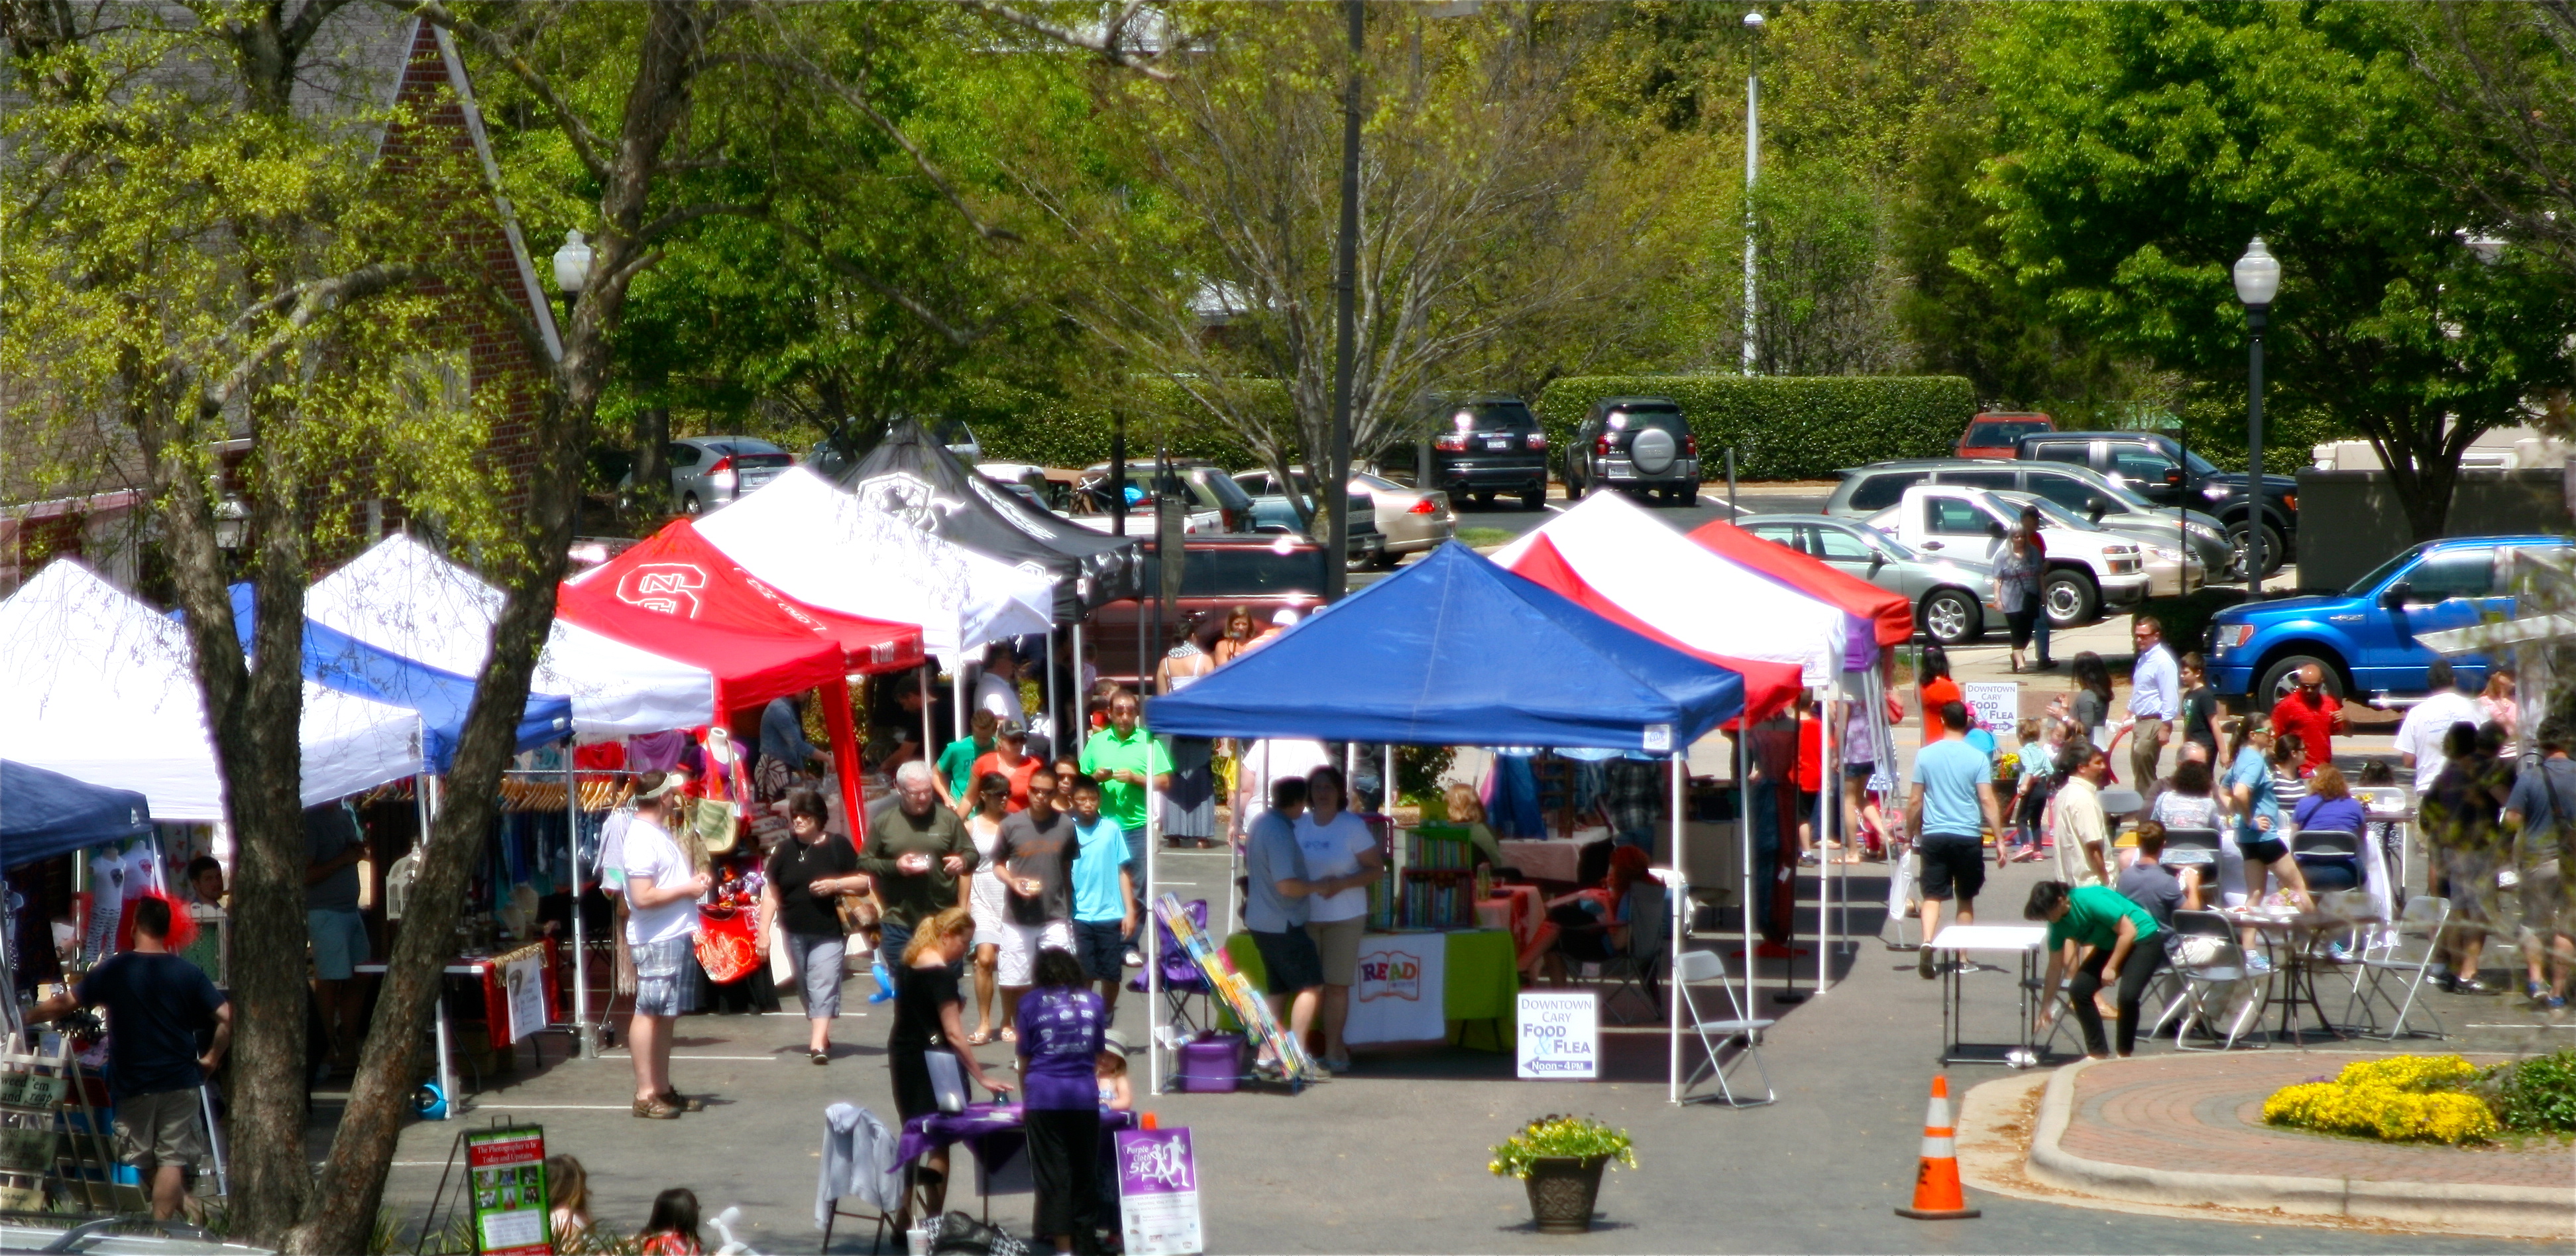 Downtown Cary Food & Flea – A Once A Month Market in Downtown Cary